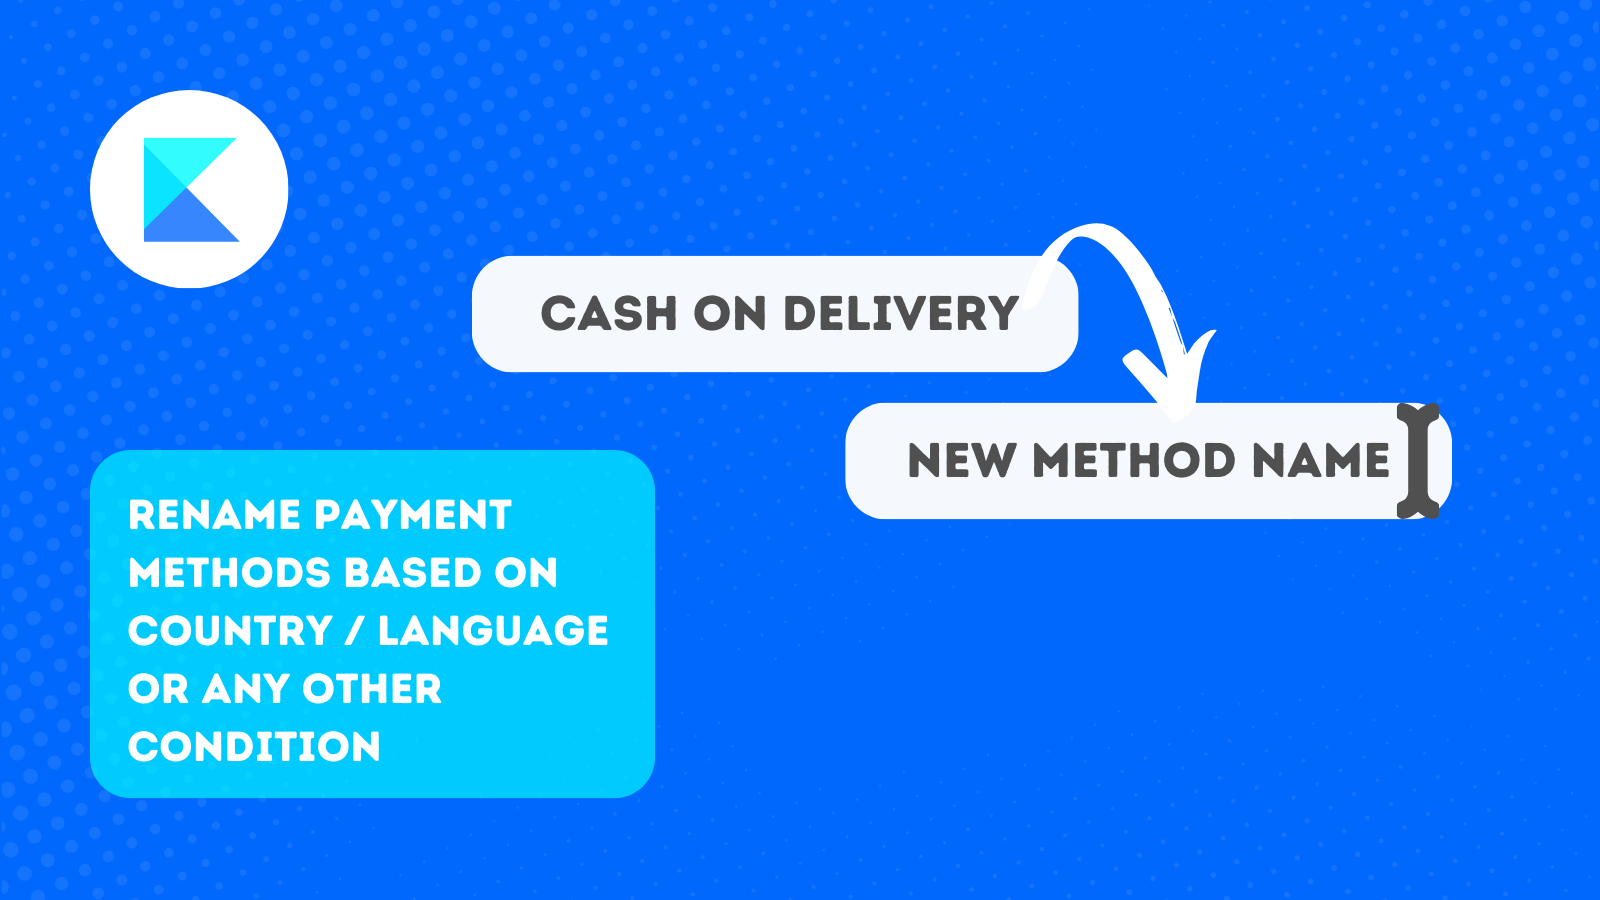 Rename payment methods based on country / language